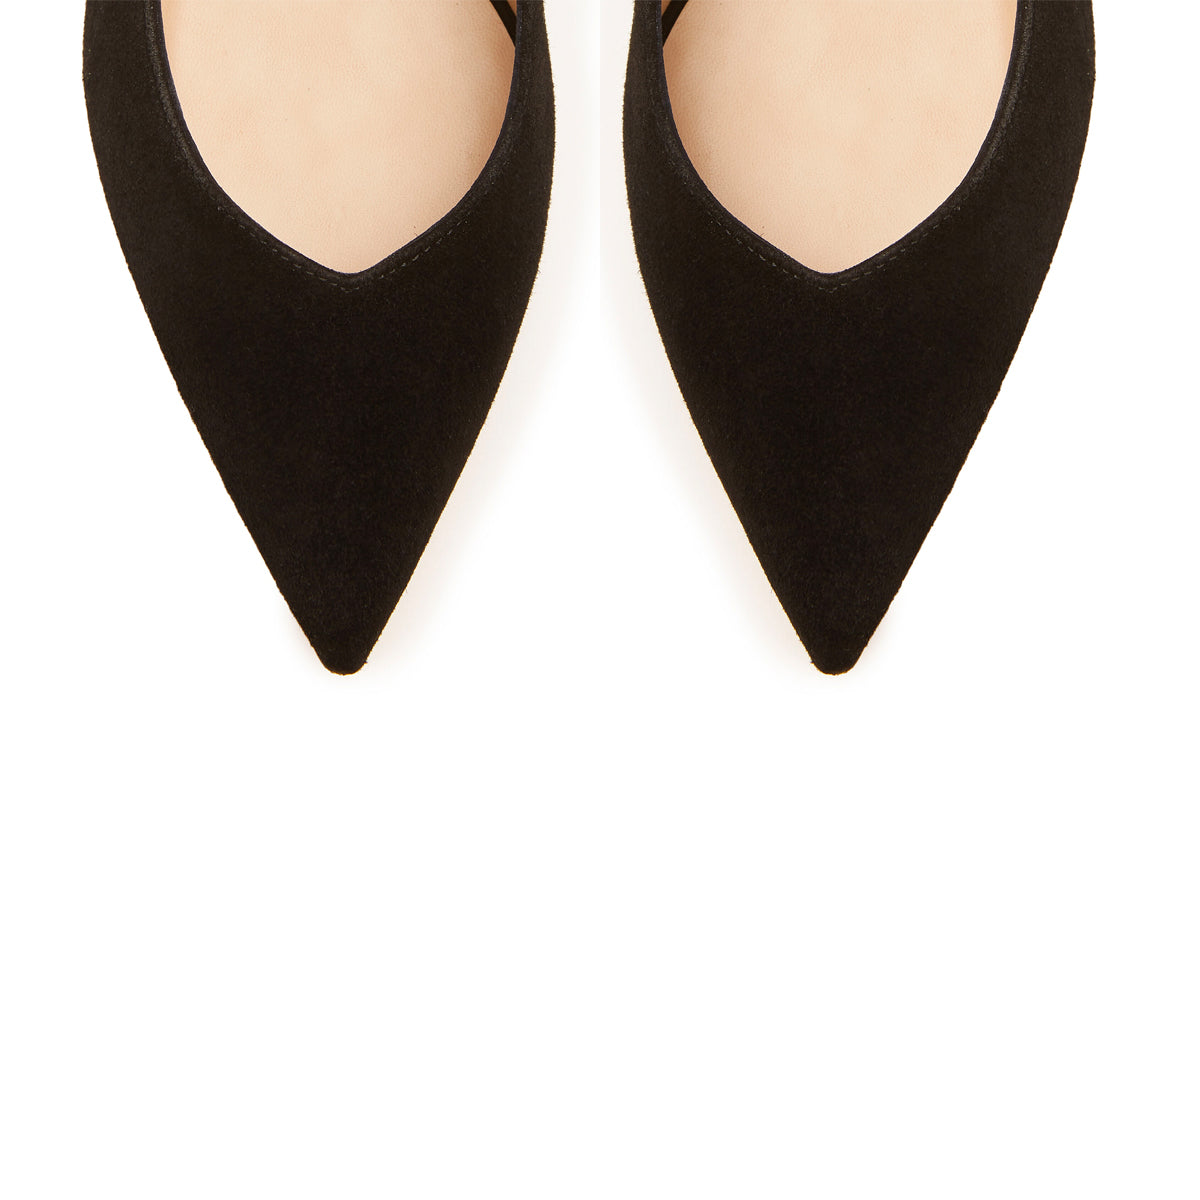 Anny 50 Pointed Pump